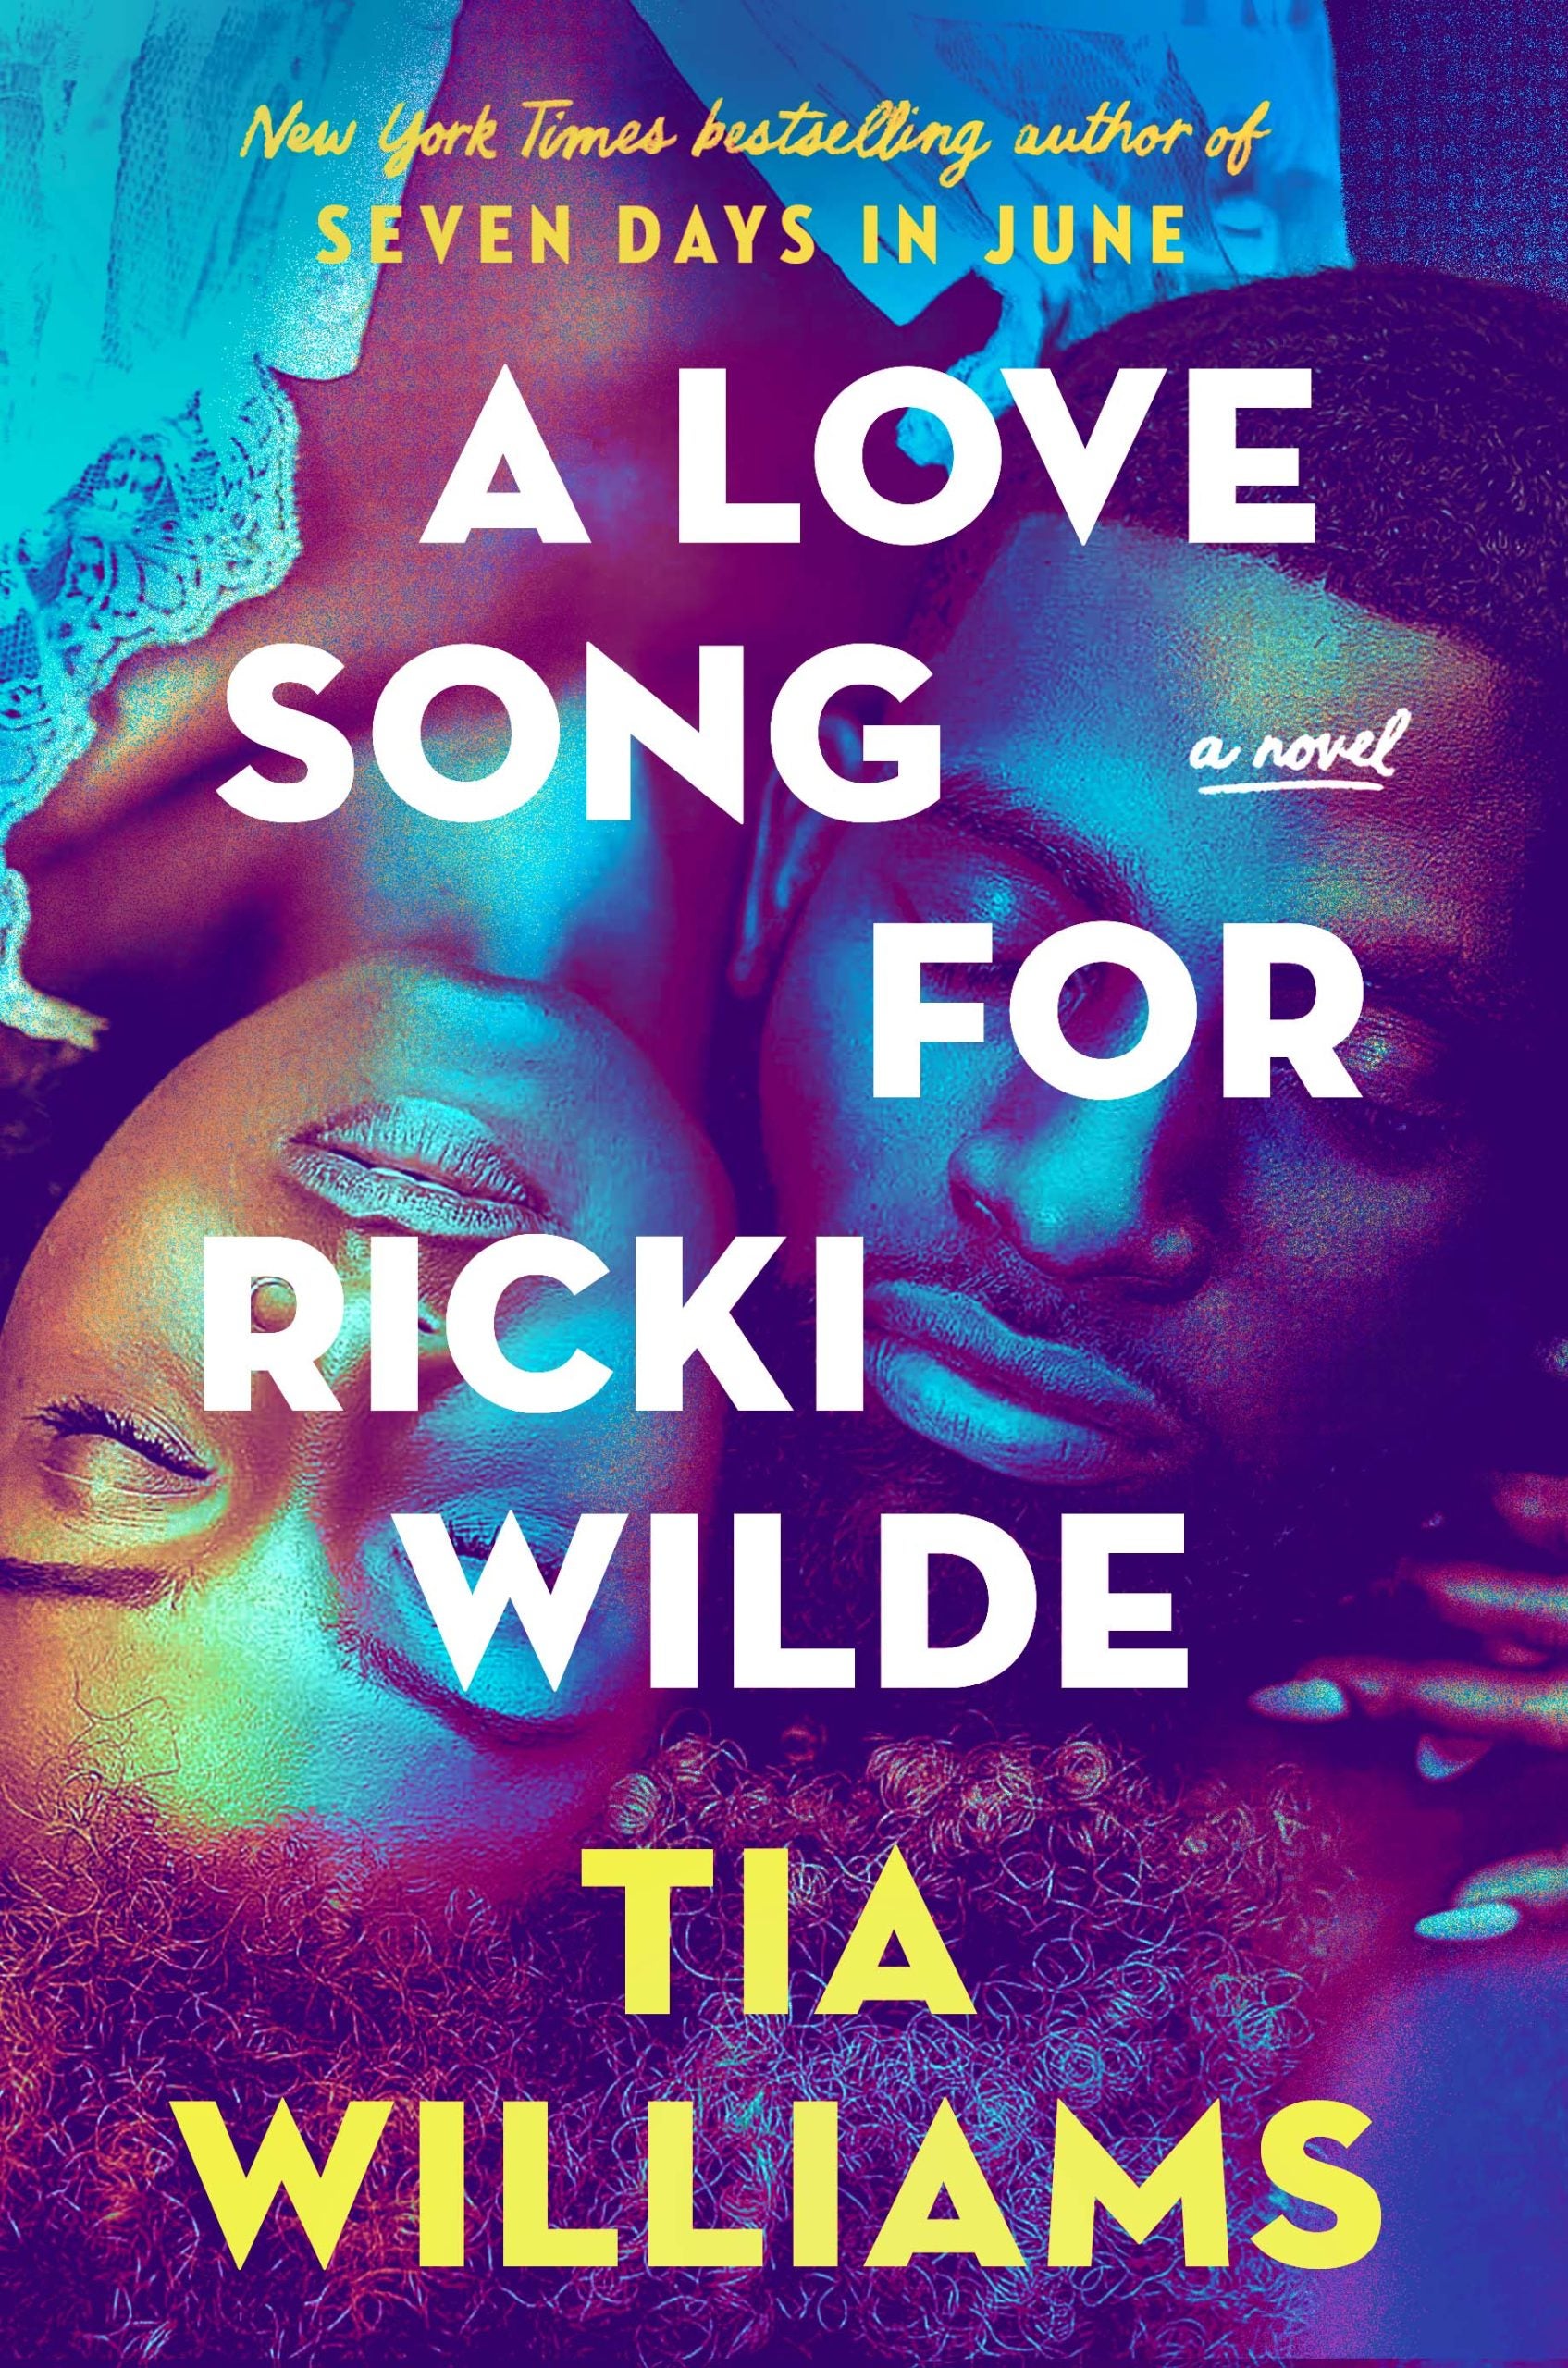 Black Love-Powered Cover Of Tia Williams’ New Book